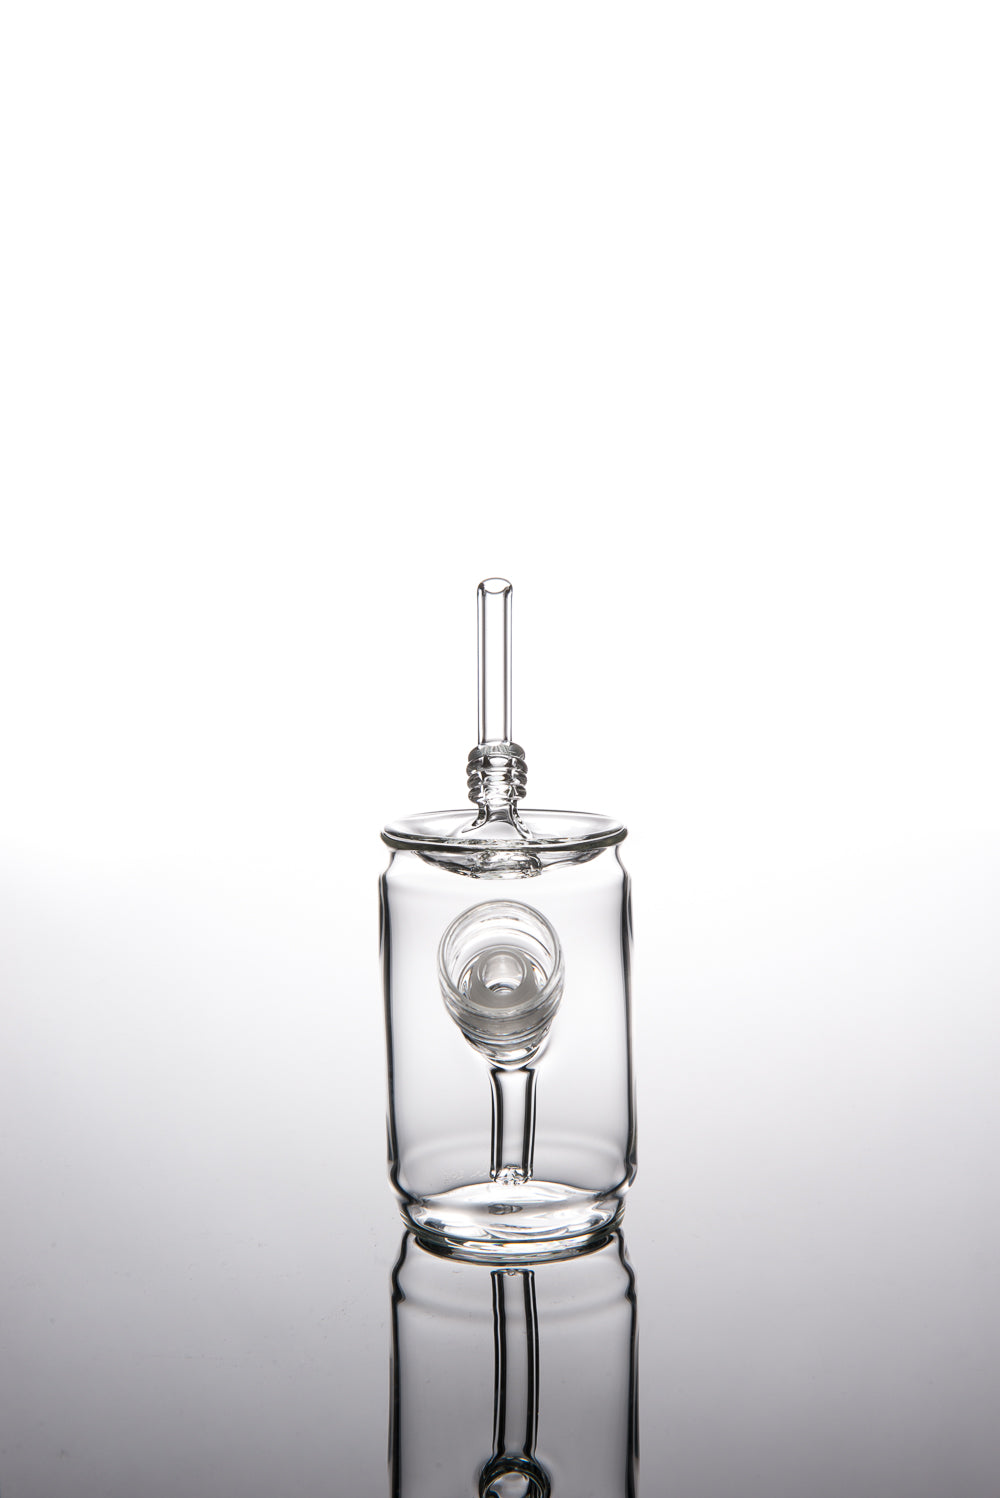 Clear Mini Can Vapor Bubbler with Straw#2  by Eskuche